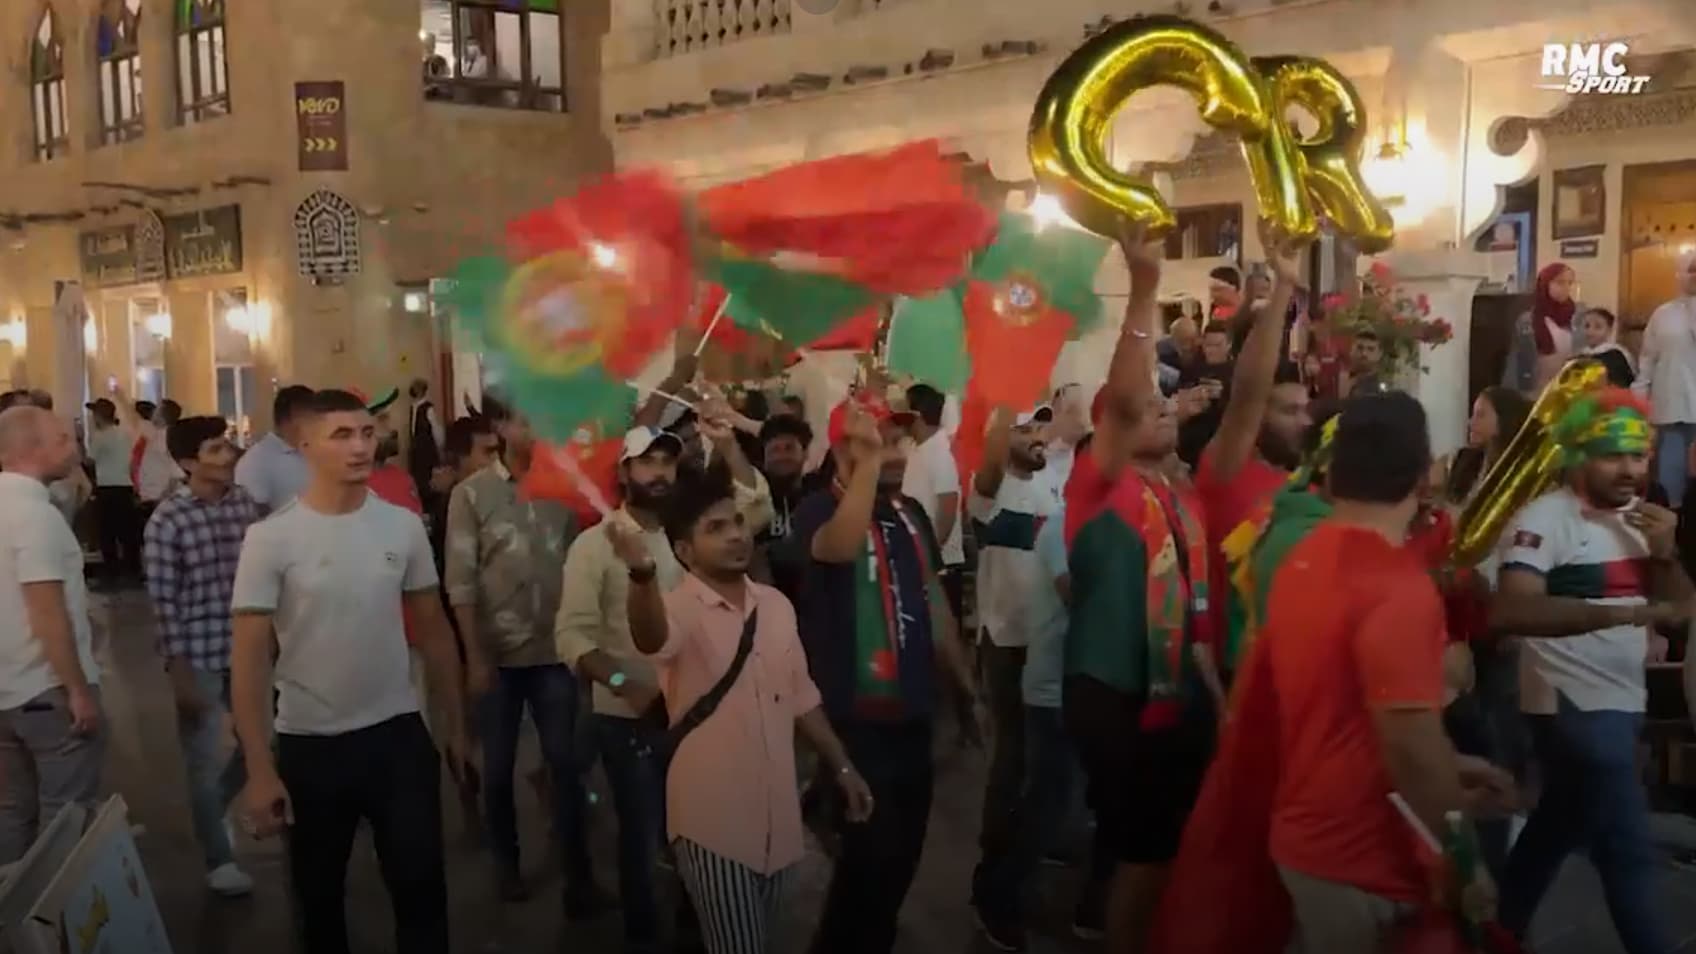 The Portuguese fans noticed in Doha are indeed ‘real’ fans from the Indian community